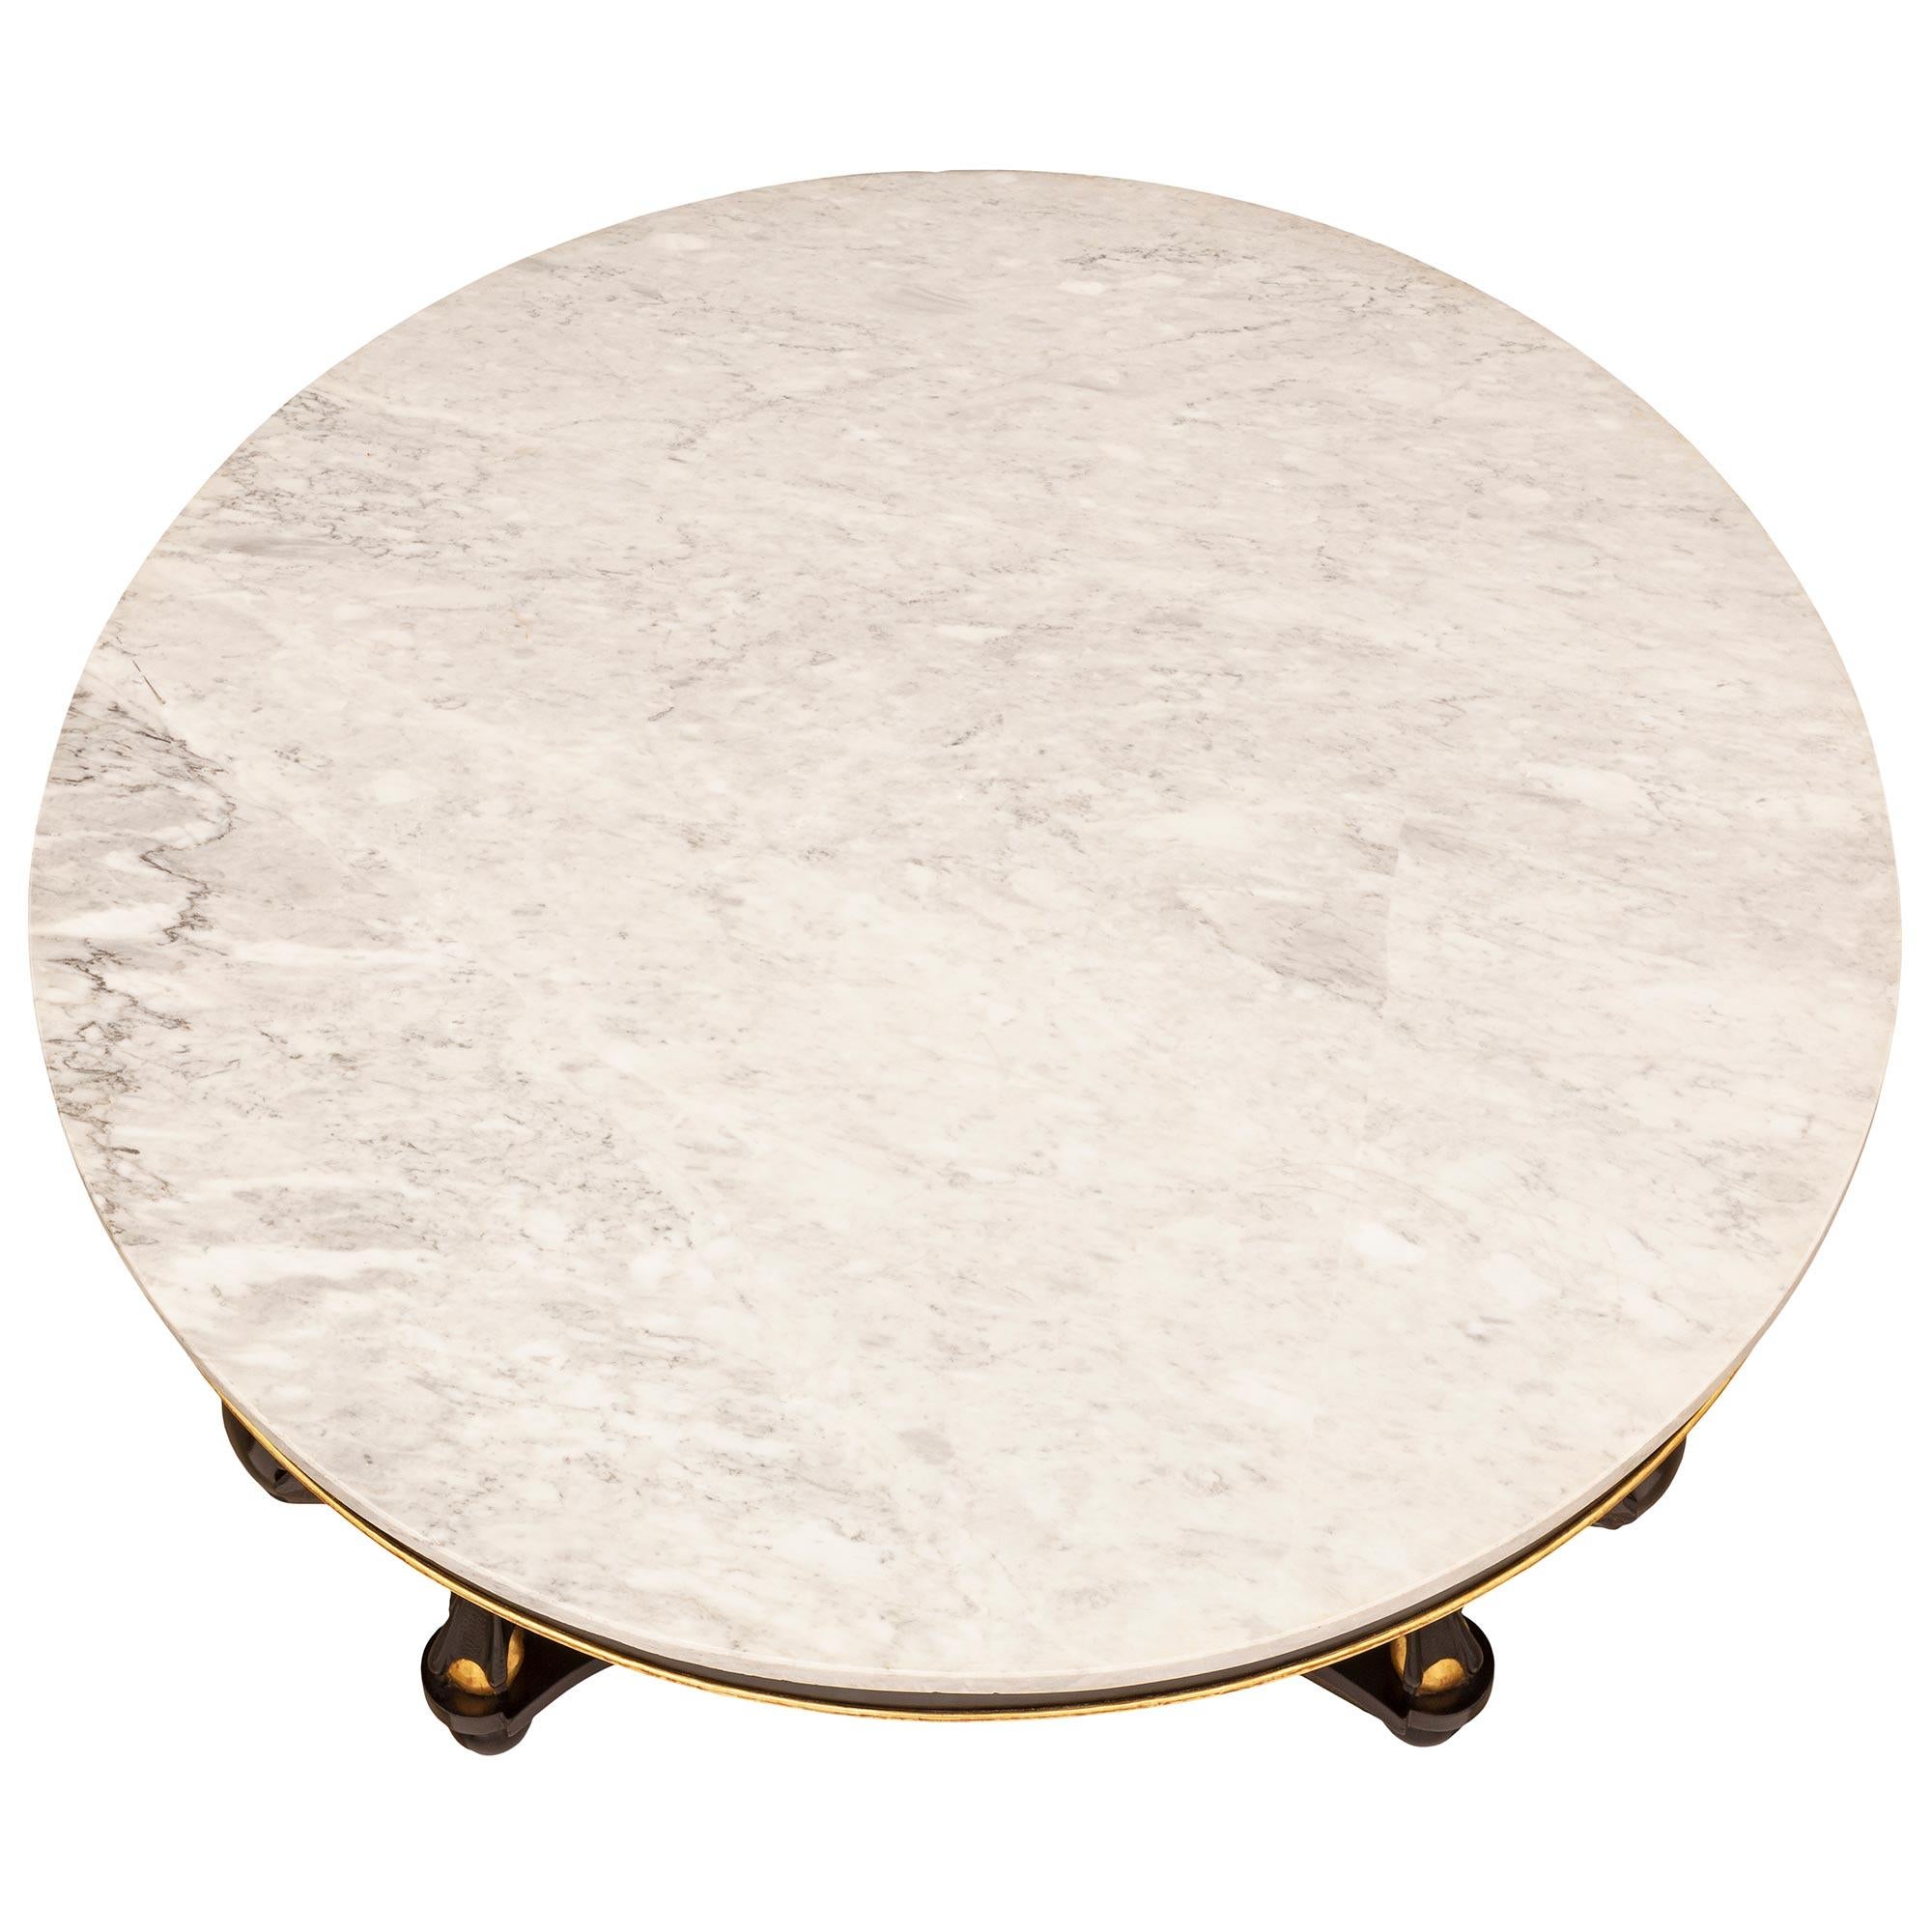 A striking late 19th century Italian ebonized fruitwood and gilt center table with a white Carrara marble top. The circular table is raised by bun feet joined by a triangular serpentine stretcher. Above are three elegant 'S' scrolled swans with